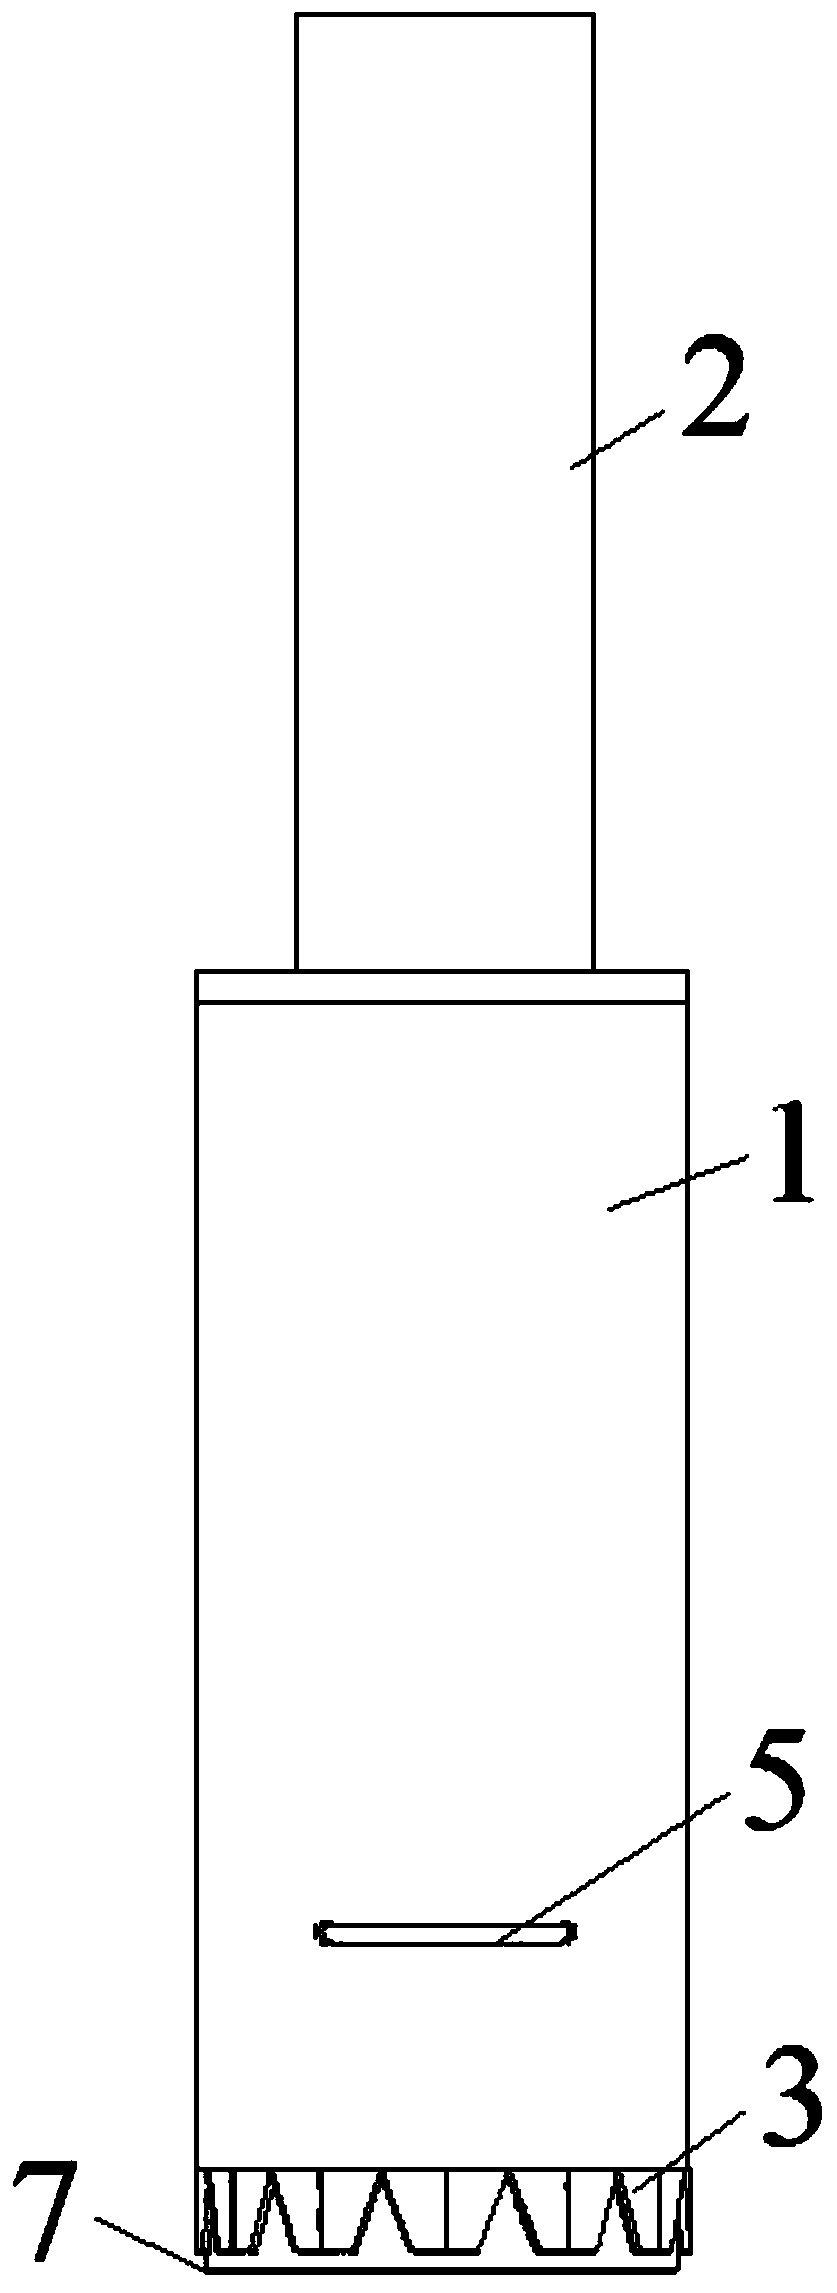 Simple ultra-large-diameter coring drill core sample extraction device and coring method